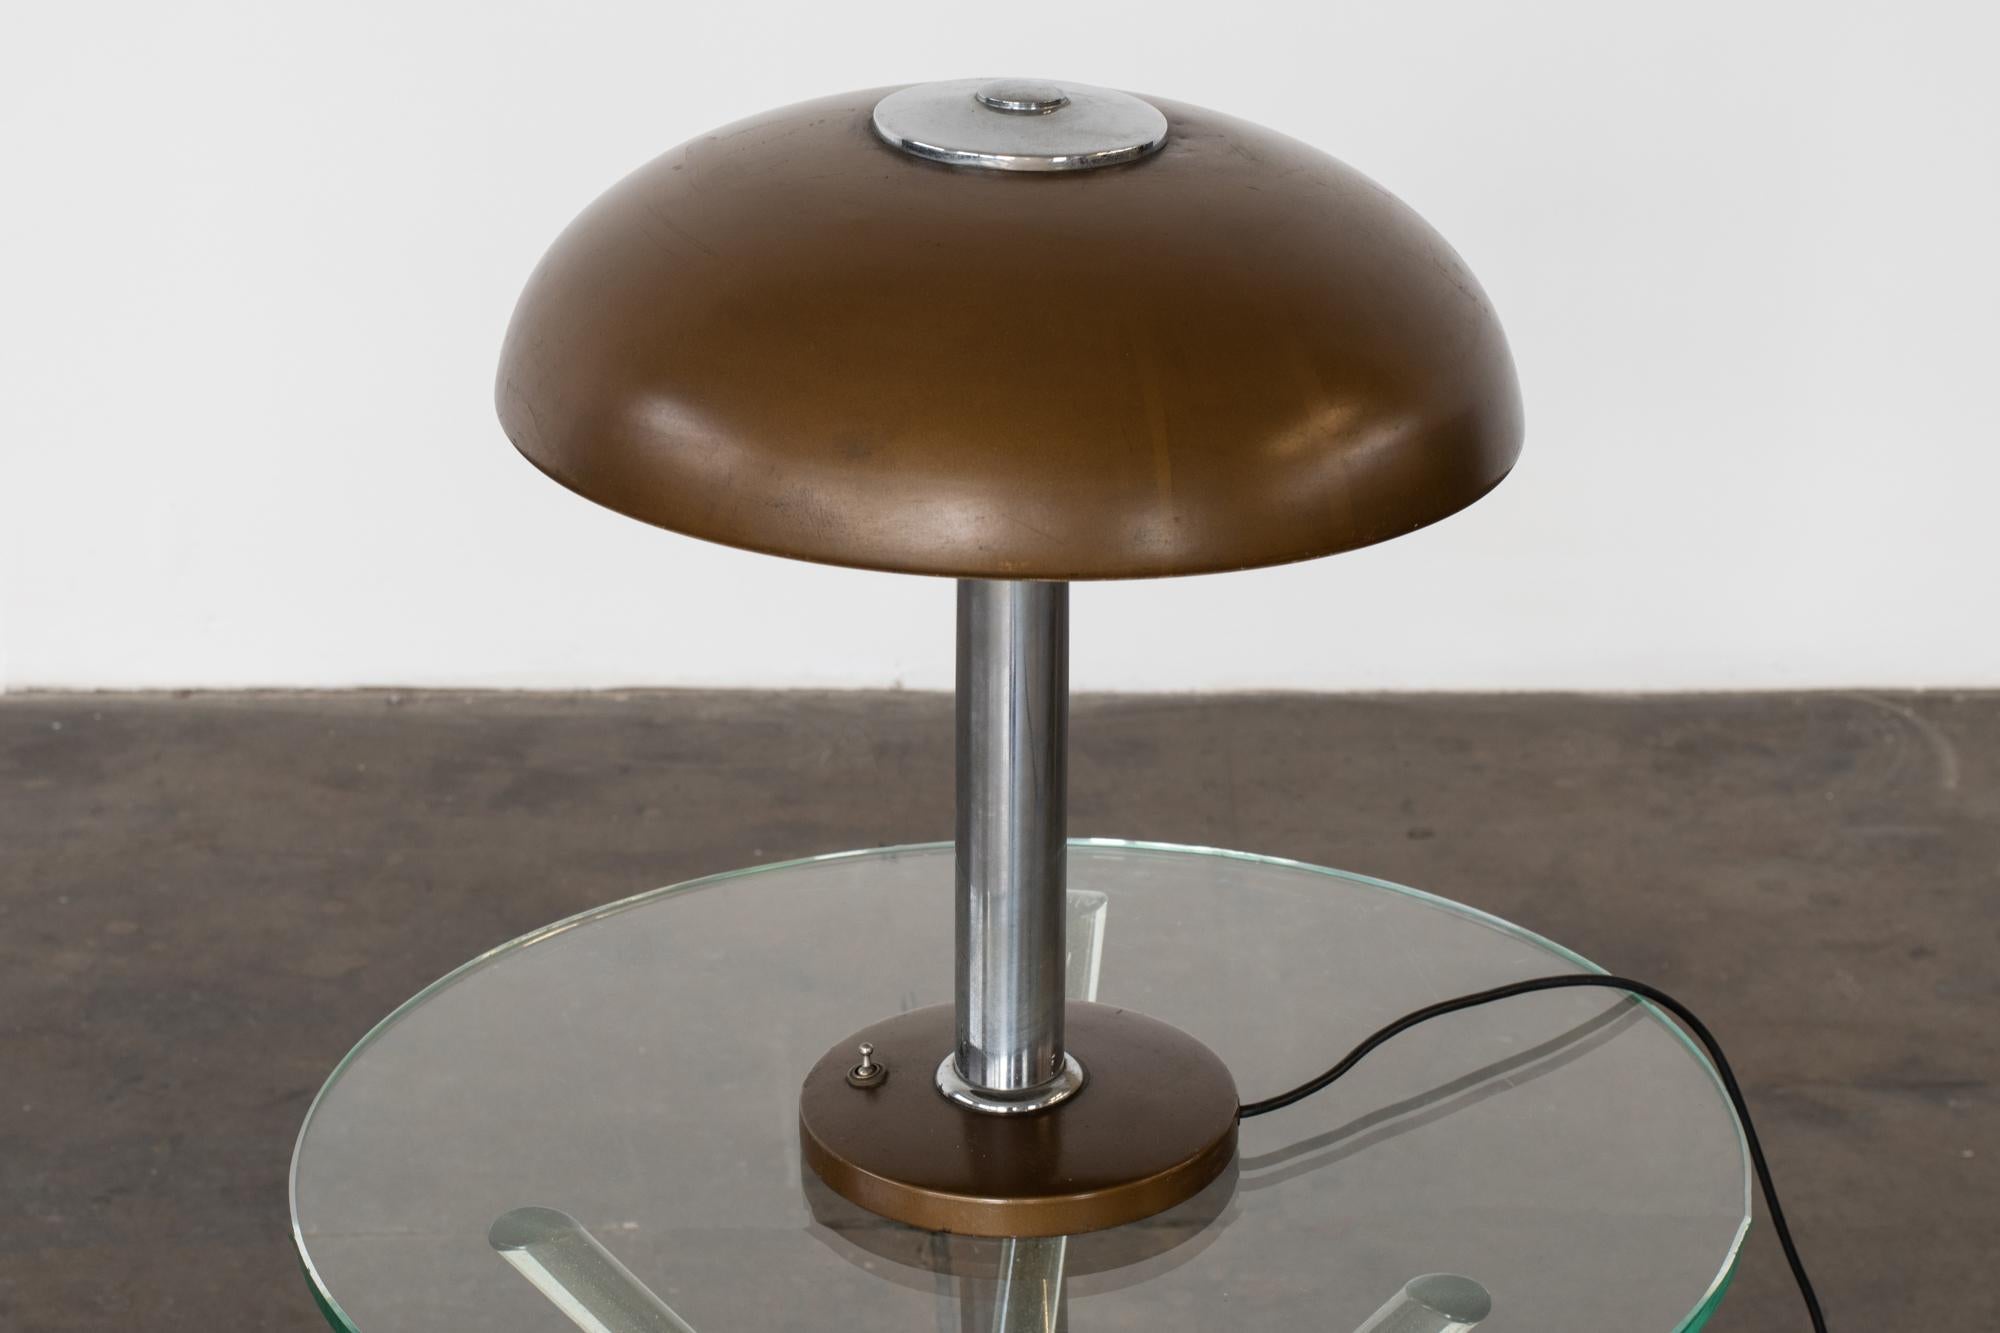 Gio Ponti Aluminium Table Lamp by Pollice, Mid-Century Modern, 1940s Italy In Good Condition In Montecatini Terme, Toscana